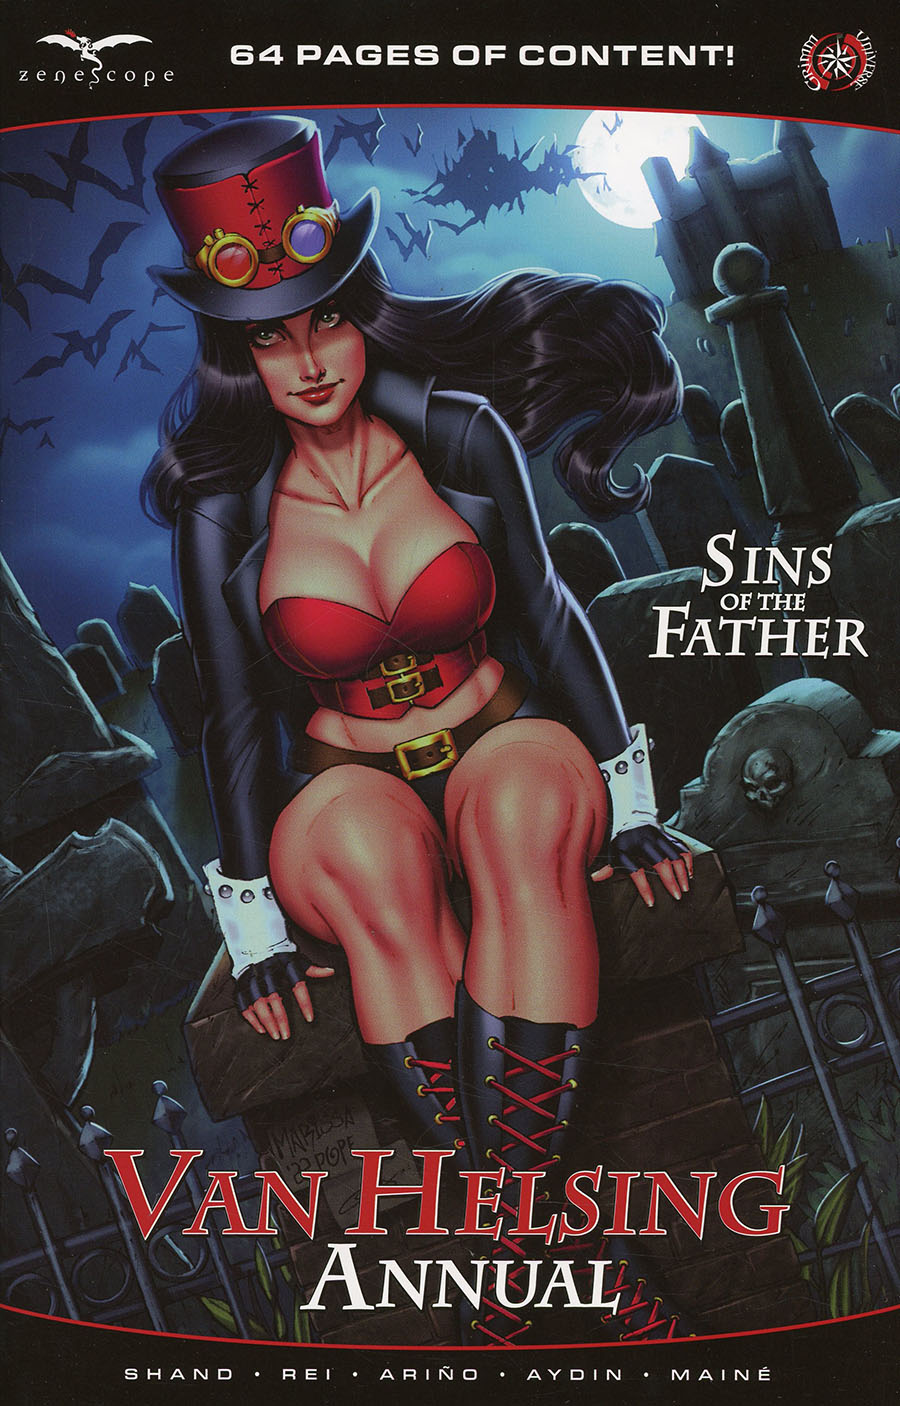 Grimm Fairy Tales Presents Van Helsing Annual Sins Of The Father #1 (One Shot) Cover D Marissa Pope